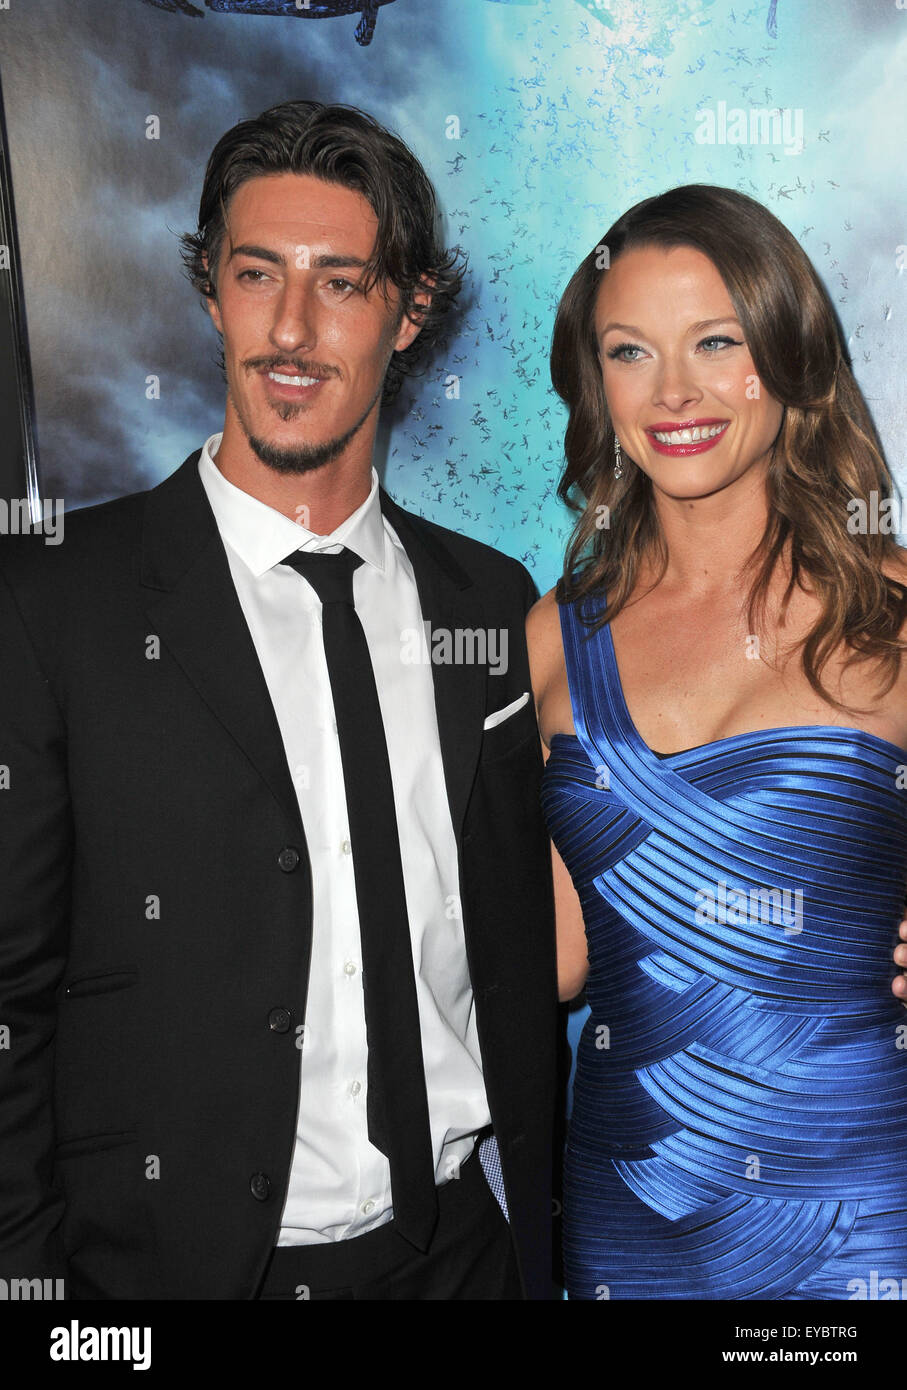 LOS ANGELES, CA - NOVEMBER 9, 2010: Eric Balfour & Scottie Thompson at the world premiere of their new movie 'Skyline' at the Regal Cinema at L.A. Live . Stock Photo